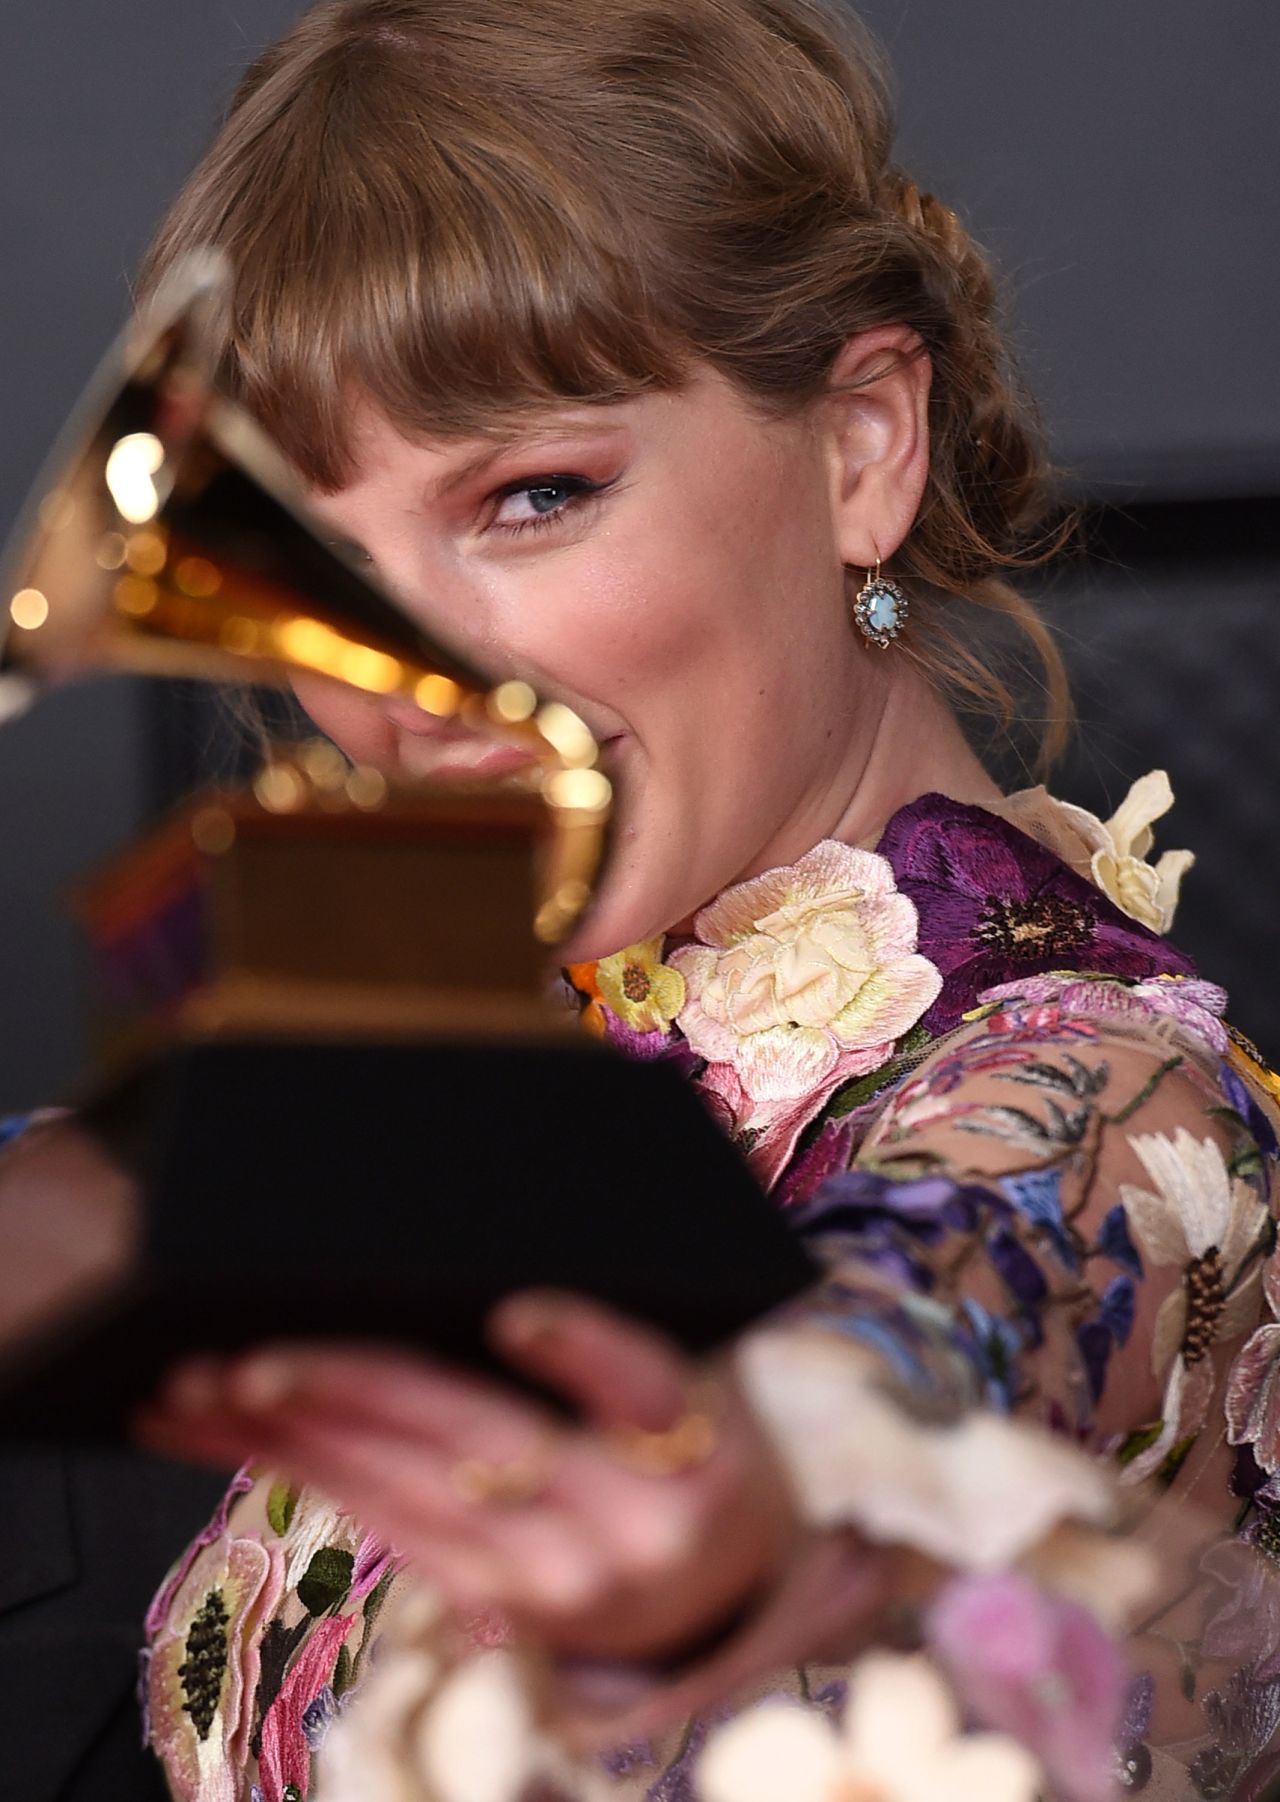 Swift poses with her album of the year award for "Folklore" at the 2021 Grammy Awards.